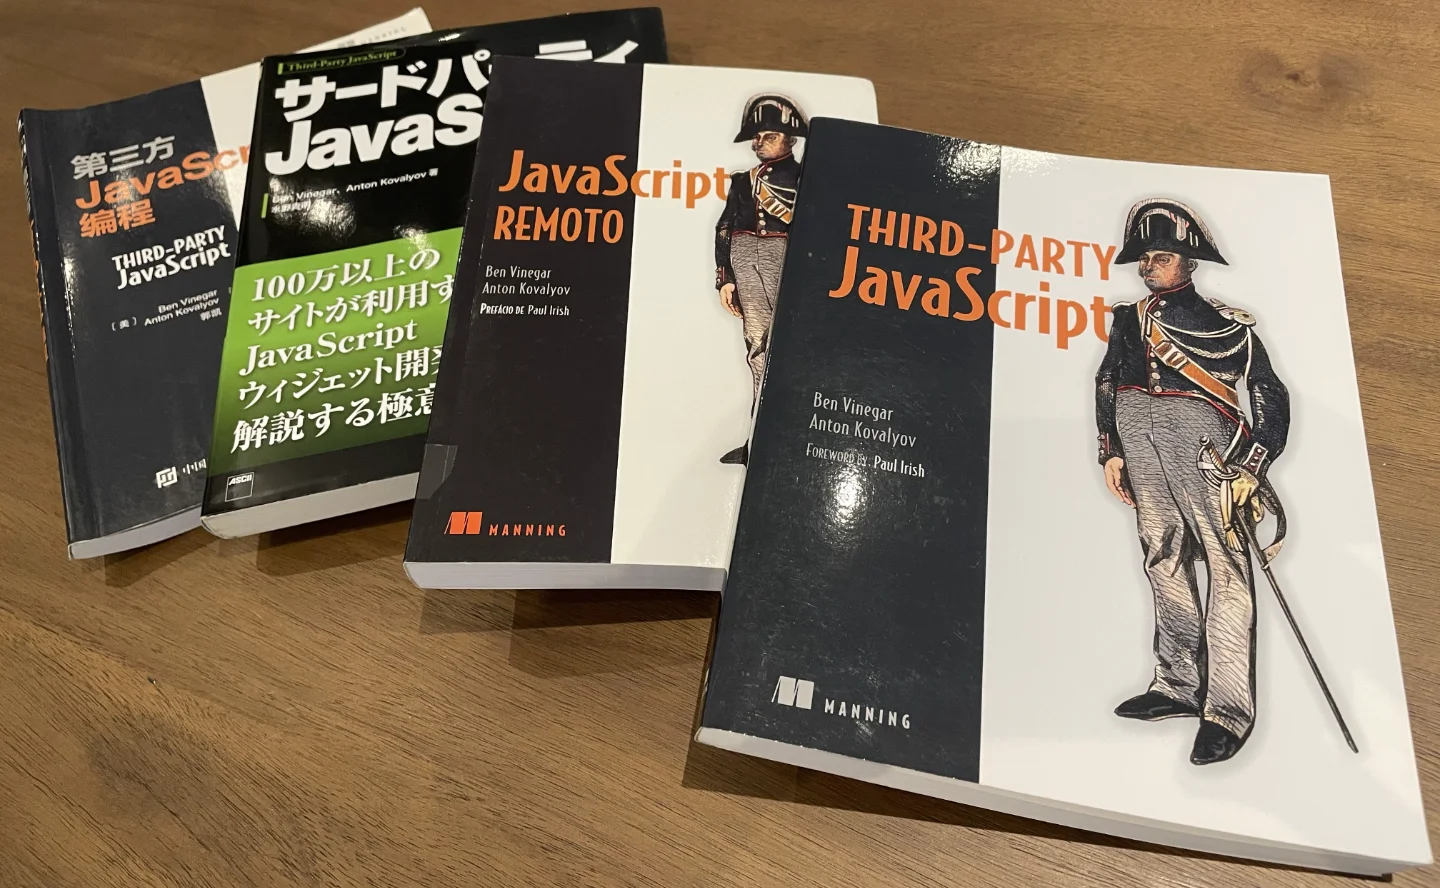 Third-party JavaScript in 4 different languages